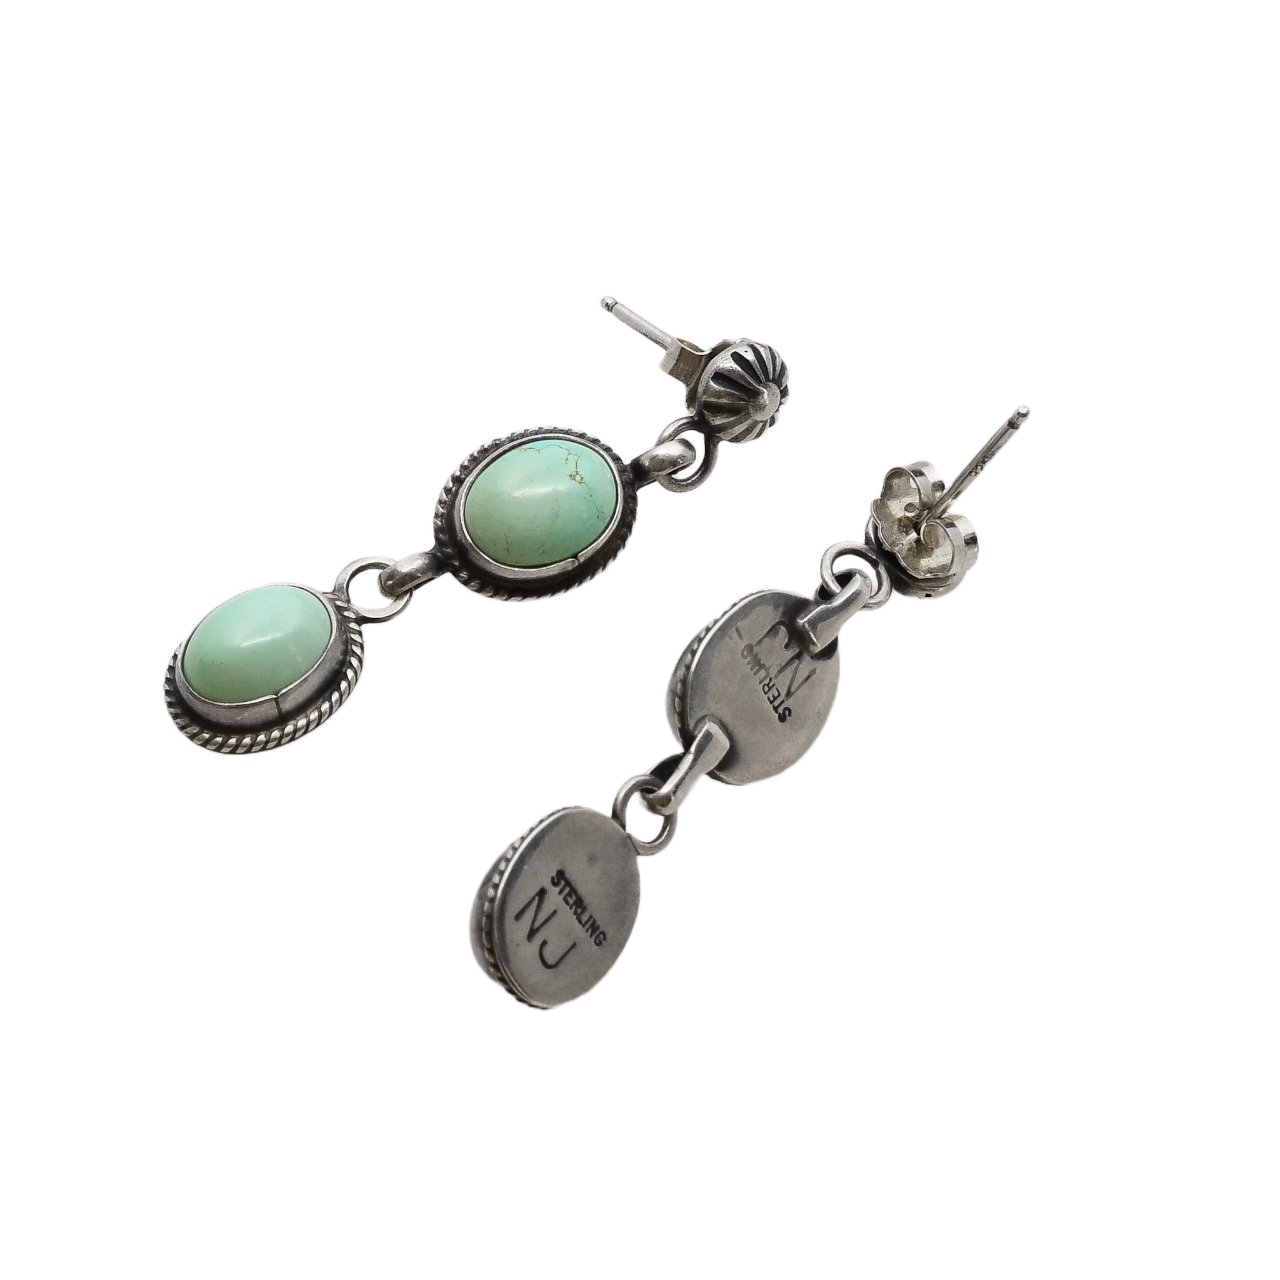 Traditional Navajo Turquoise and Silver Dangle Earrings - Turquoise & Tufa